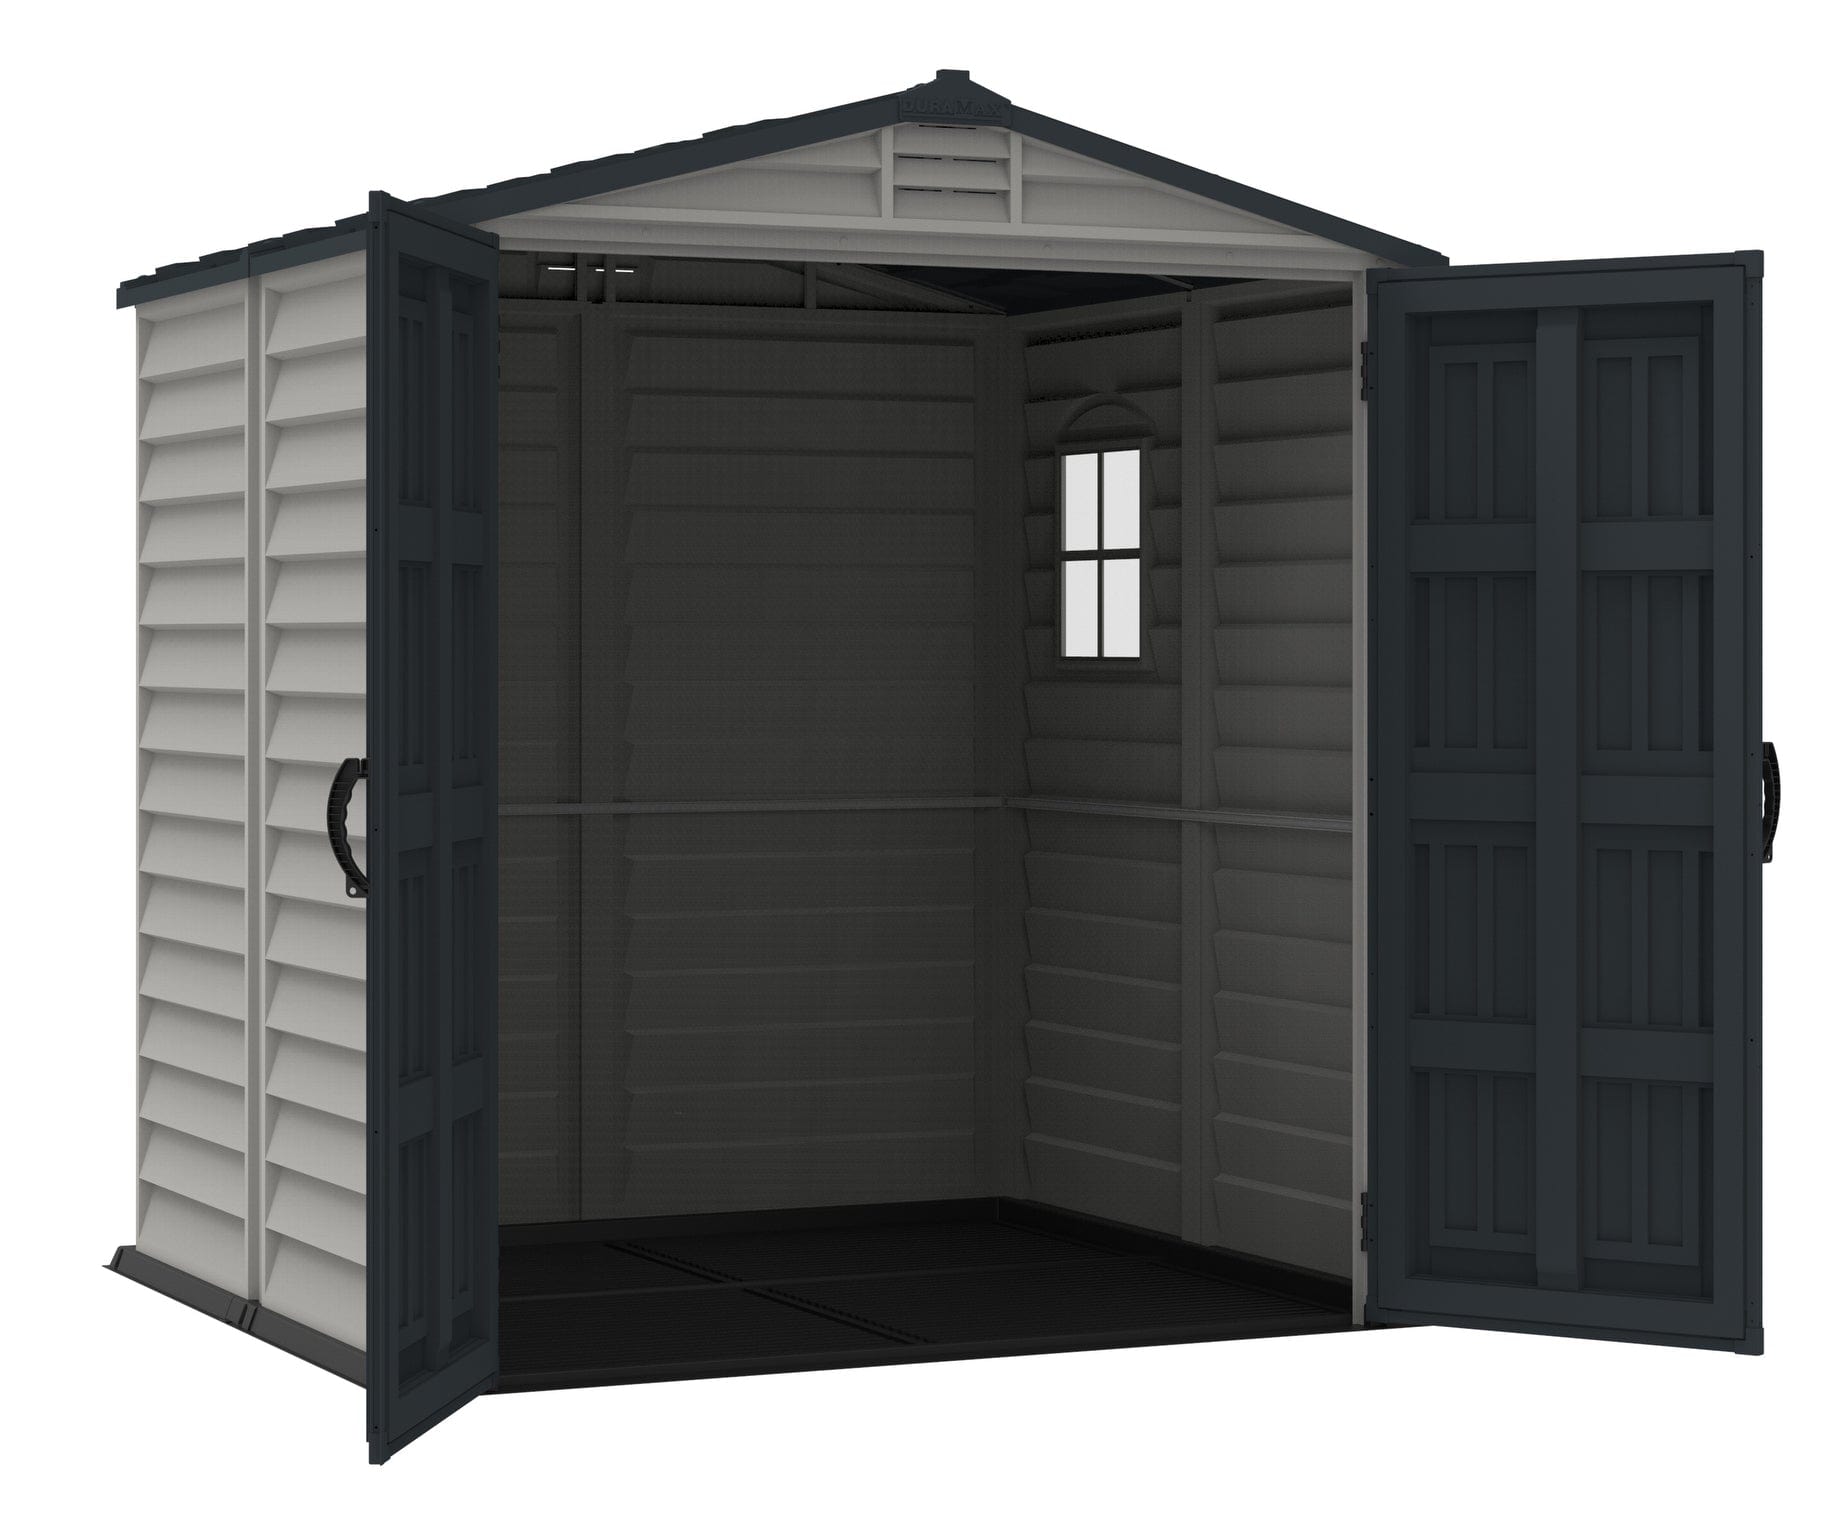 DuraMax Vinyl Shed 6x6 StoreMate Plus with Foundation Kit